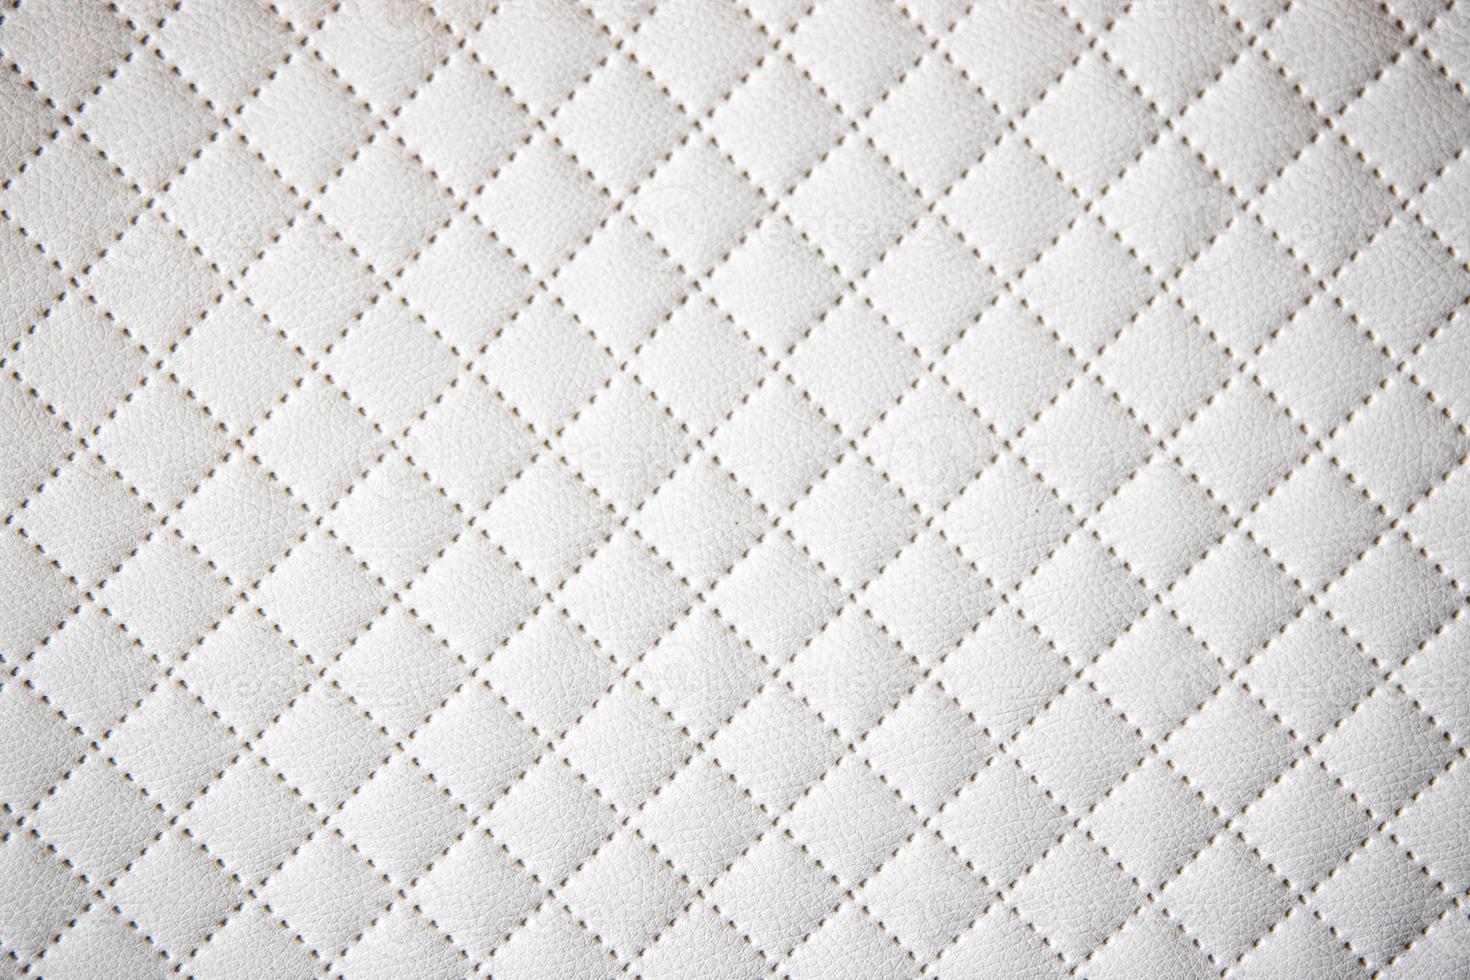 interesting original white leather background with quilting pattern photo